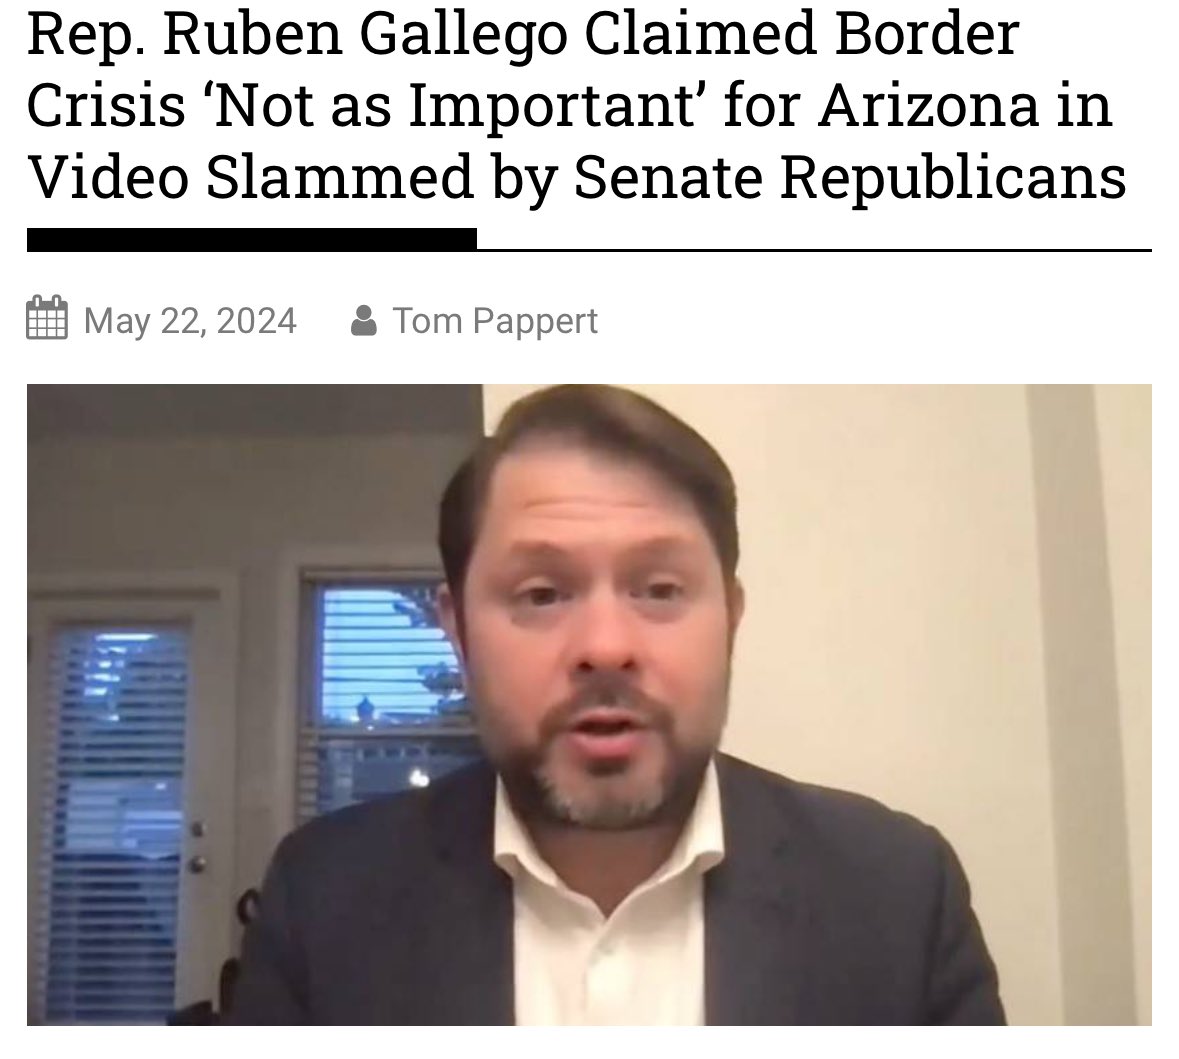 .@RubenGallego claims that the border crisis is 'not as important' in Arizona. It defies polling & logic, but Ruben votes in defiance of both. That’s why he votes with @JoeBiden 100% of the time. Its why he has consistently mocked, obstructed, & threatened anyone who tried to